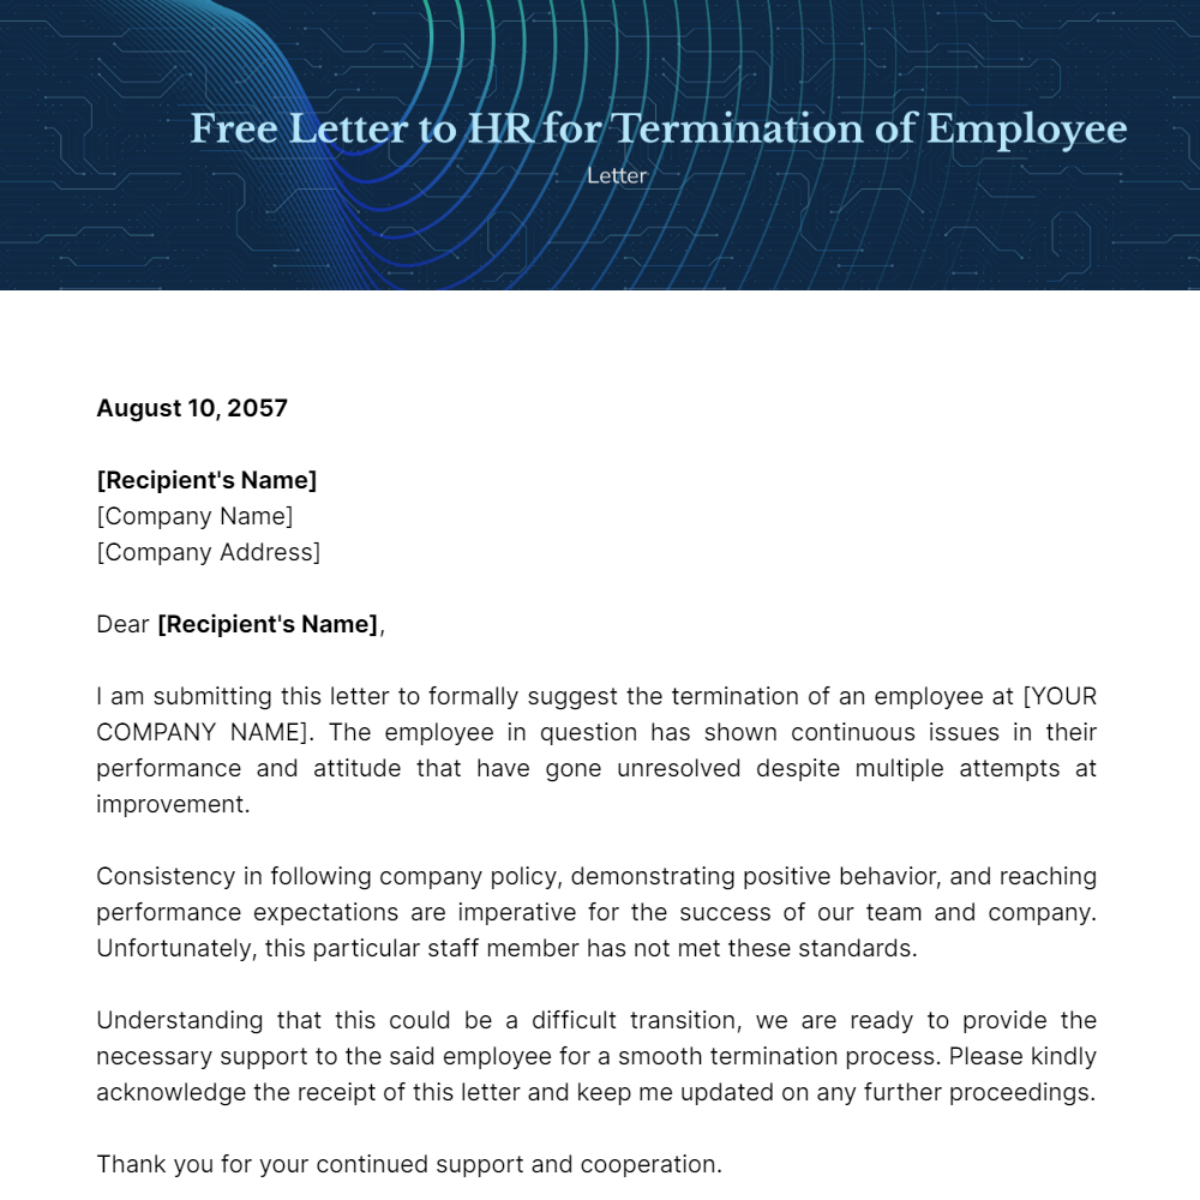 Letter to HR for Termination of Employee Template